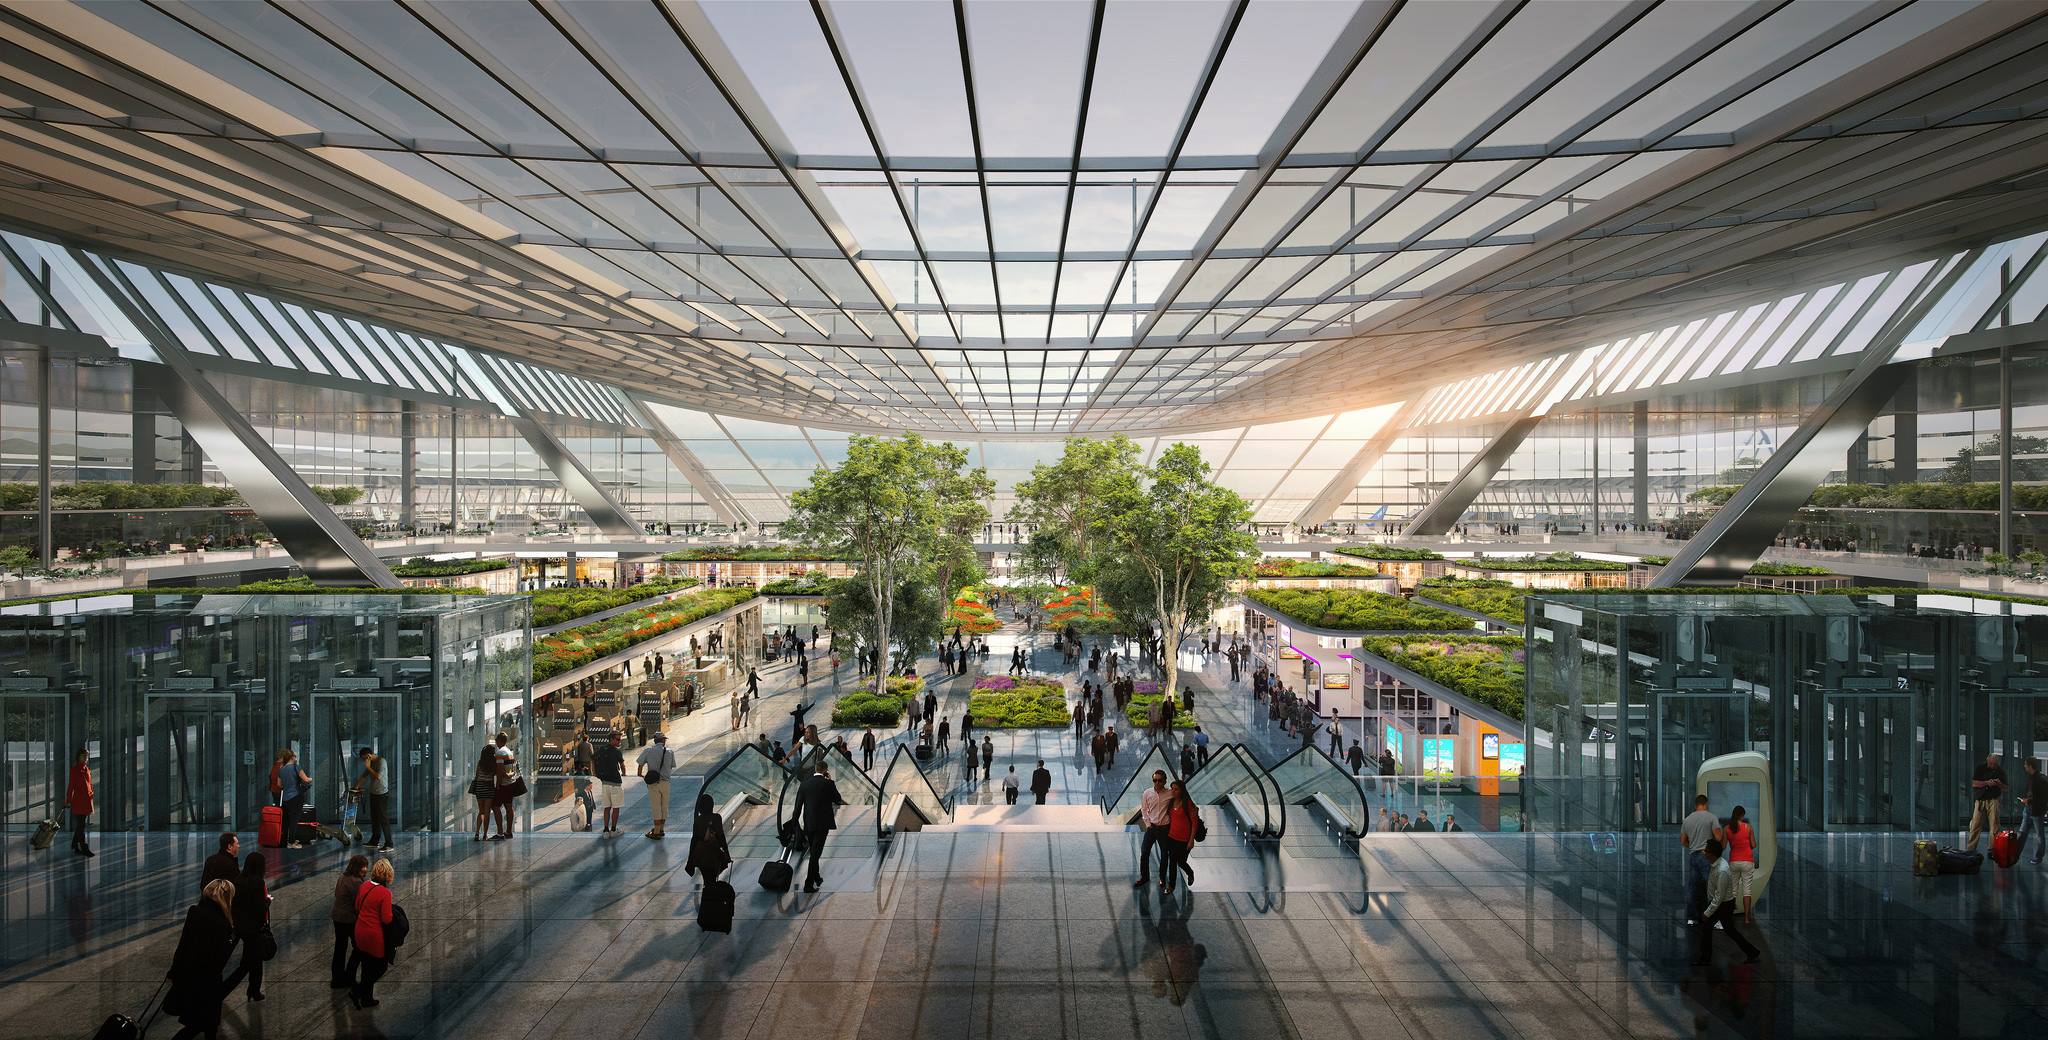 Fig. 1. Norman Foster, Terminal 3 building at Taoyuan International Airport. From: http://www.dezeen.com/2015/09/22/foster-partners-rogers-stirk-harbour-unstudio-compete-design-major-taiwan-airport-terminal-taoyuan-international-taipei/ (accessed September 18, 2016). 